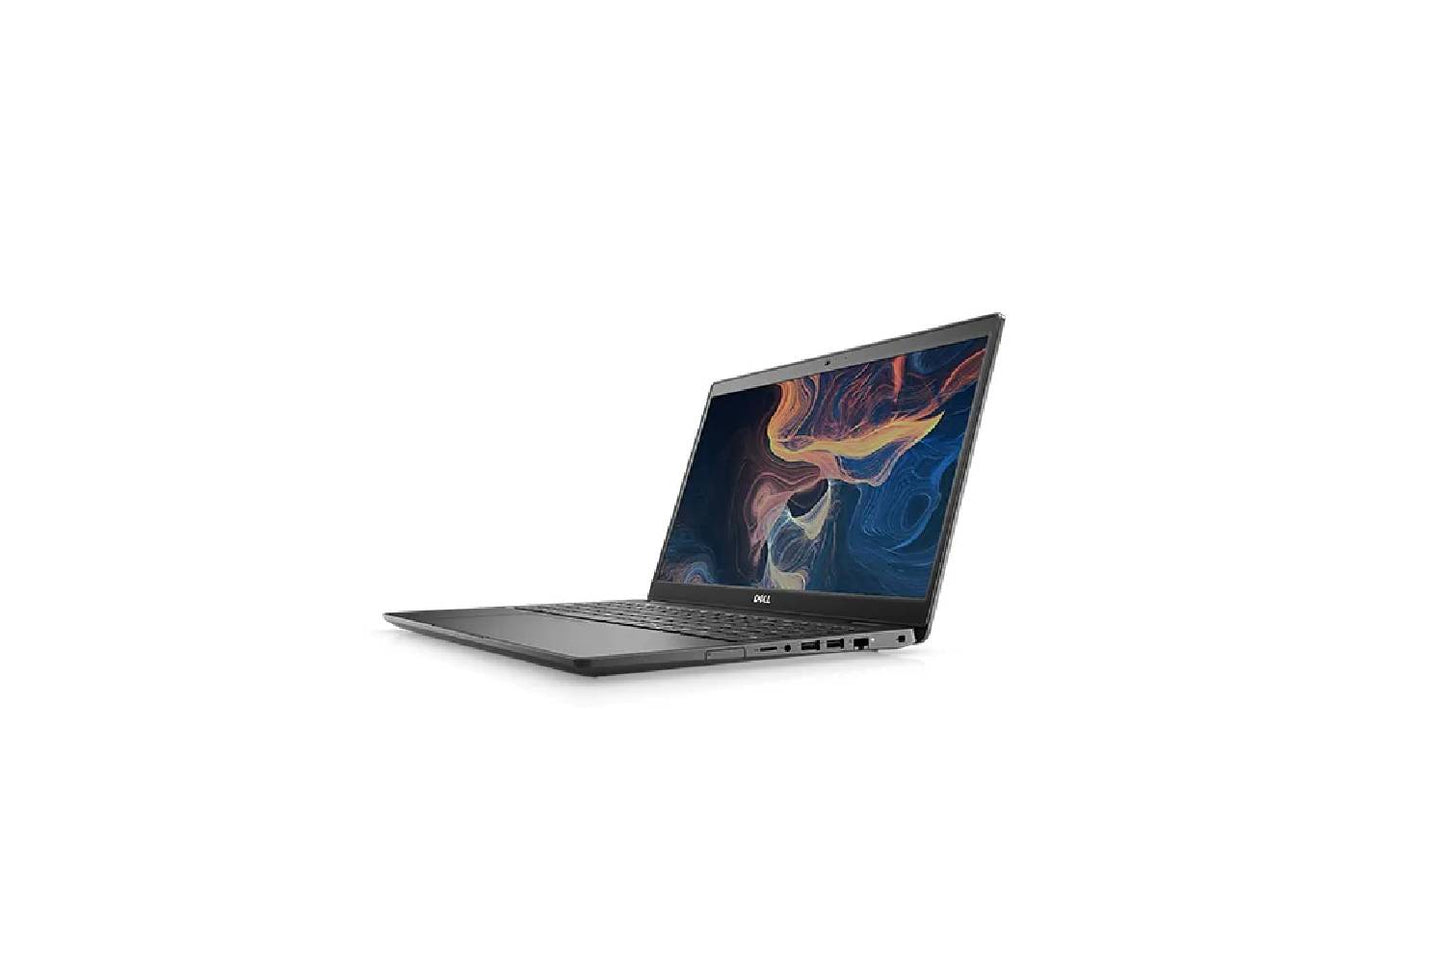 Dell Latitude 15 3510 Laptop with intel i3 10th Gen